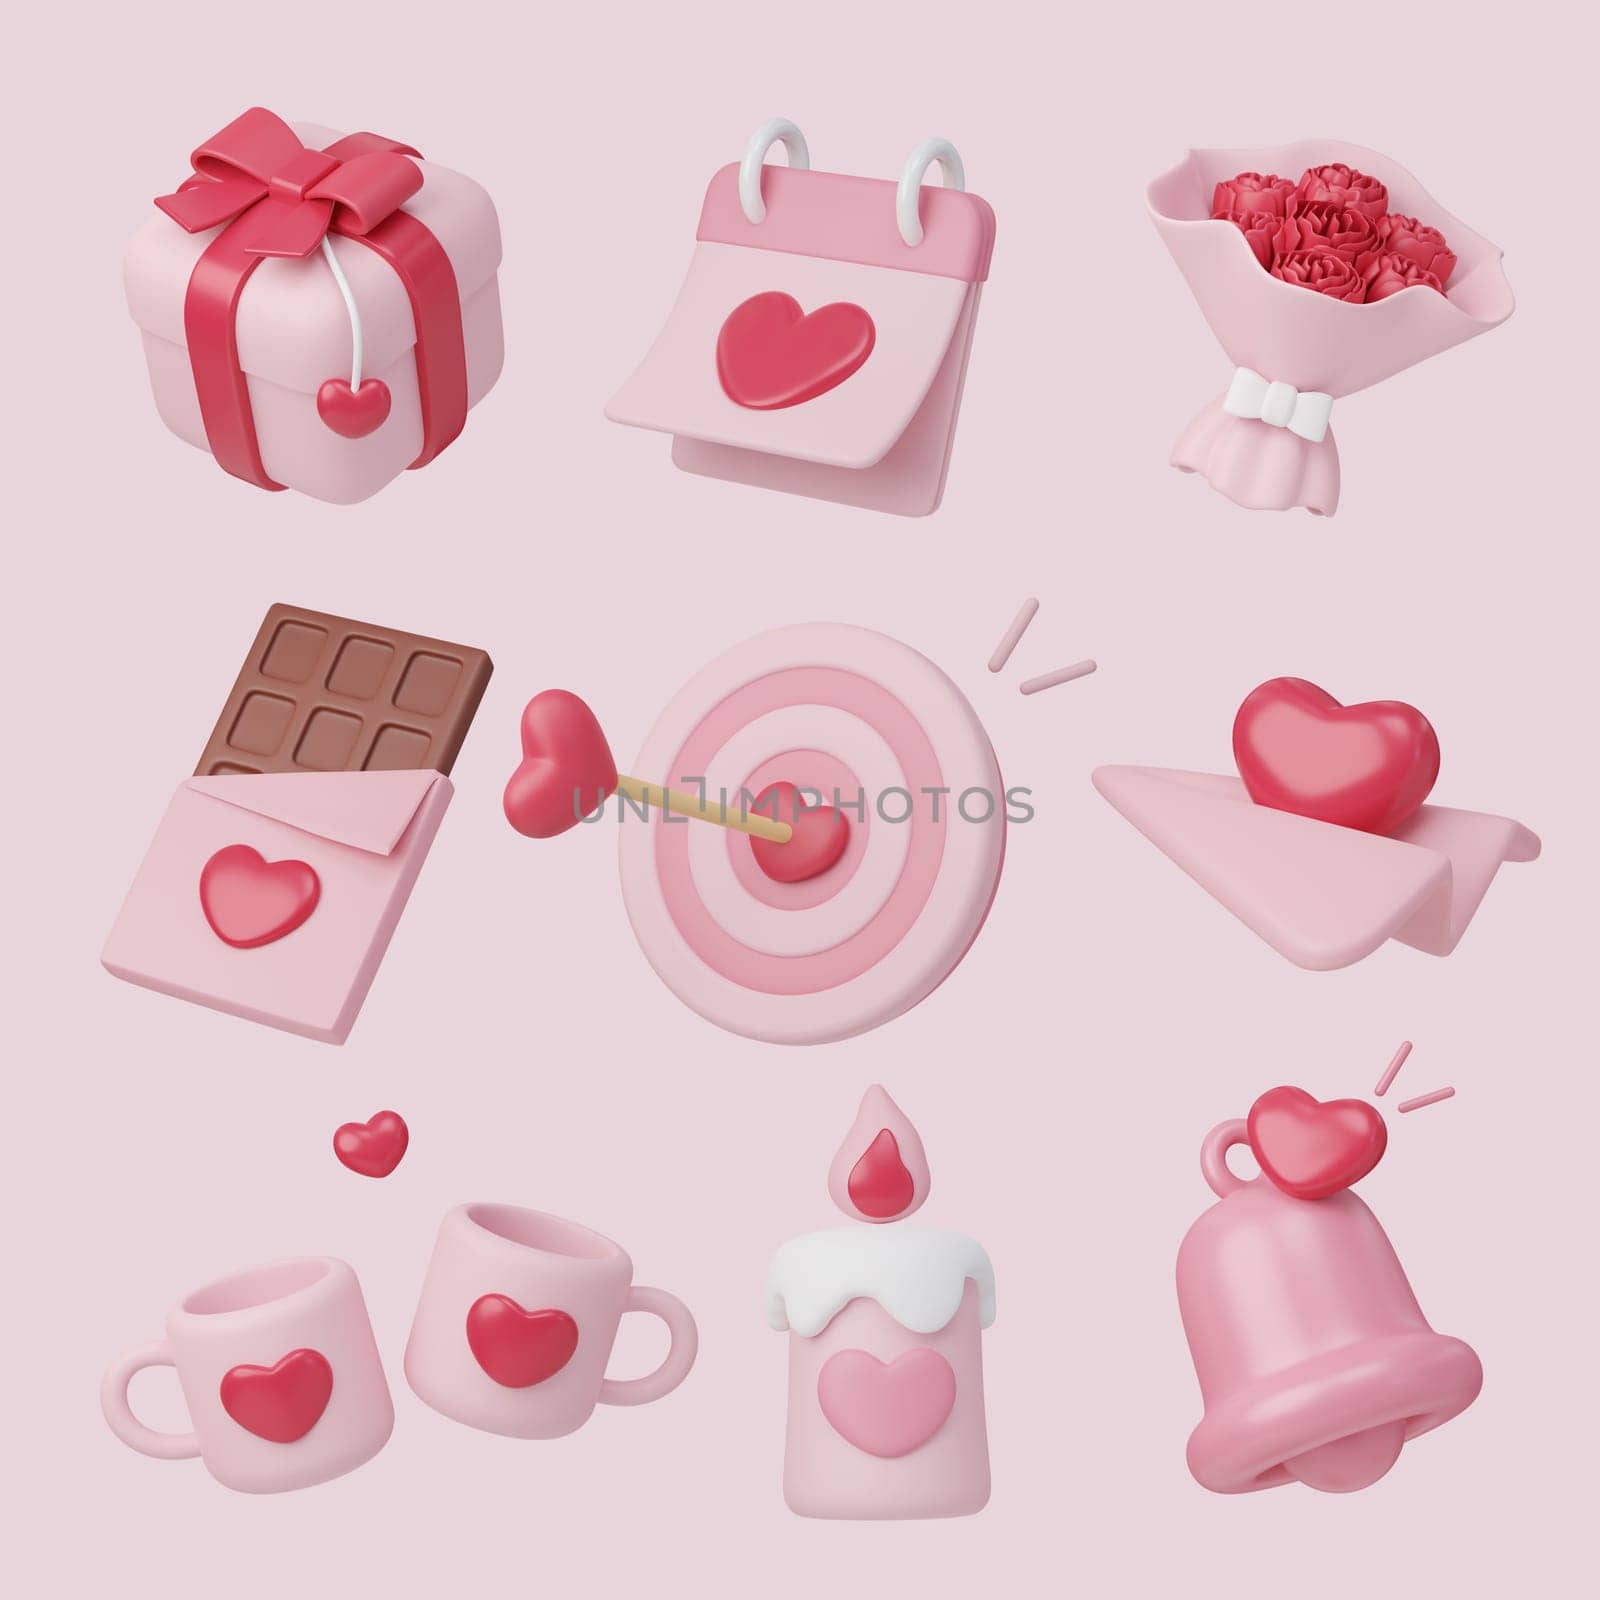 3d icon set of Valentine's day ,Hearts, sweet chocolate and gifts, Valentine's Day Concept.3d rendering illustration. Clipping path. by meepiangraphic